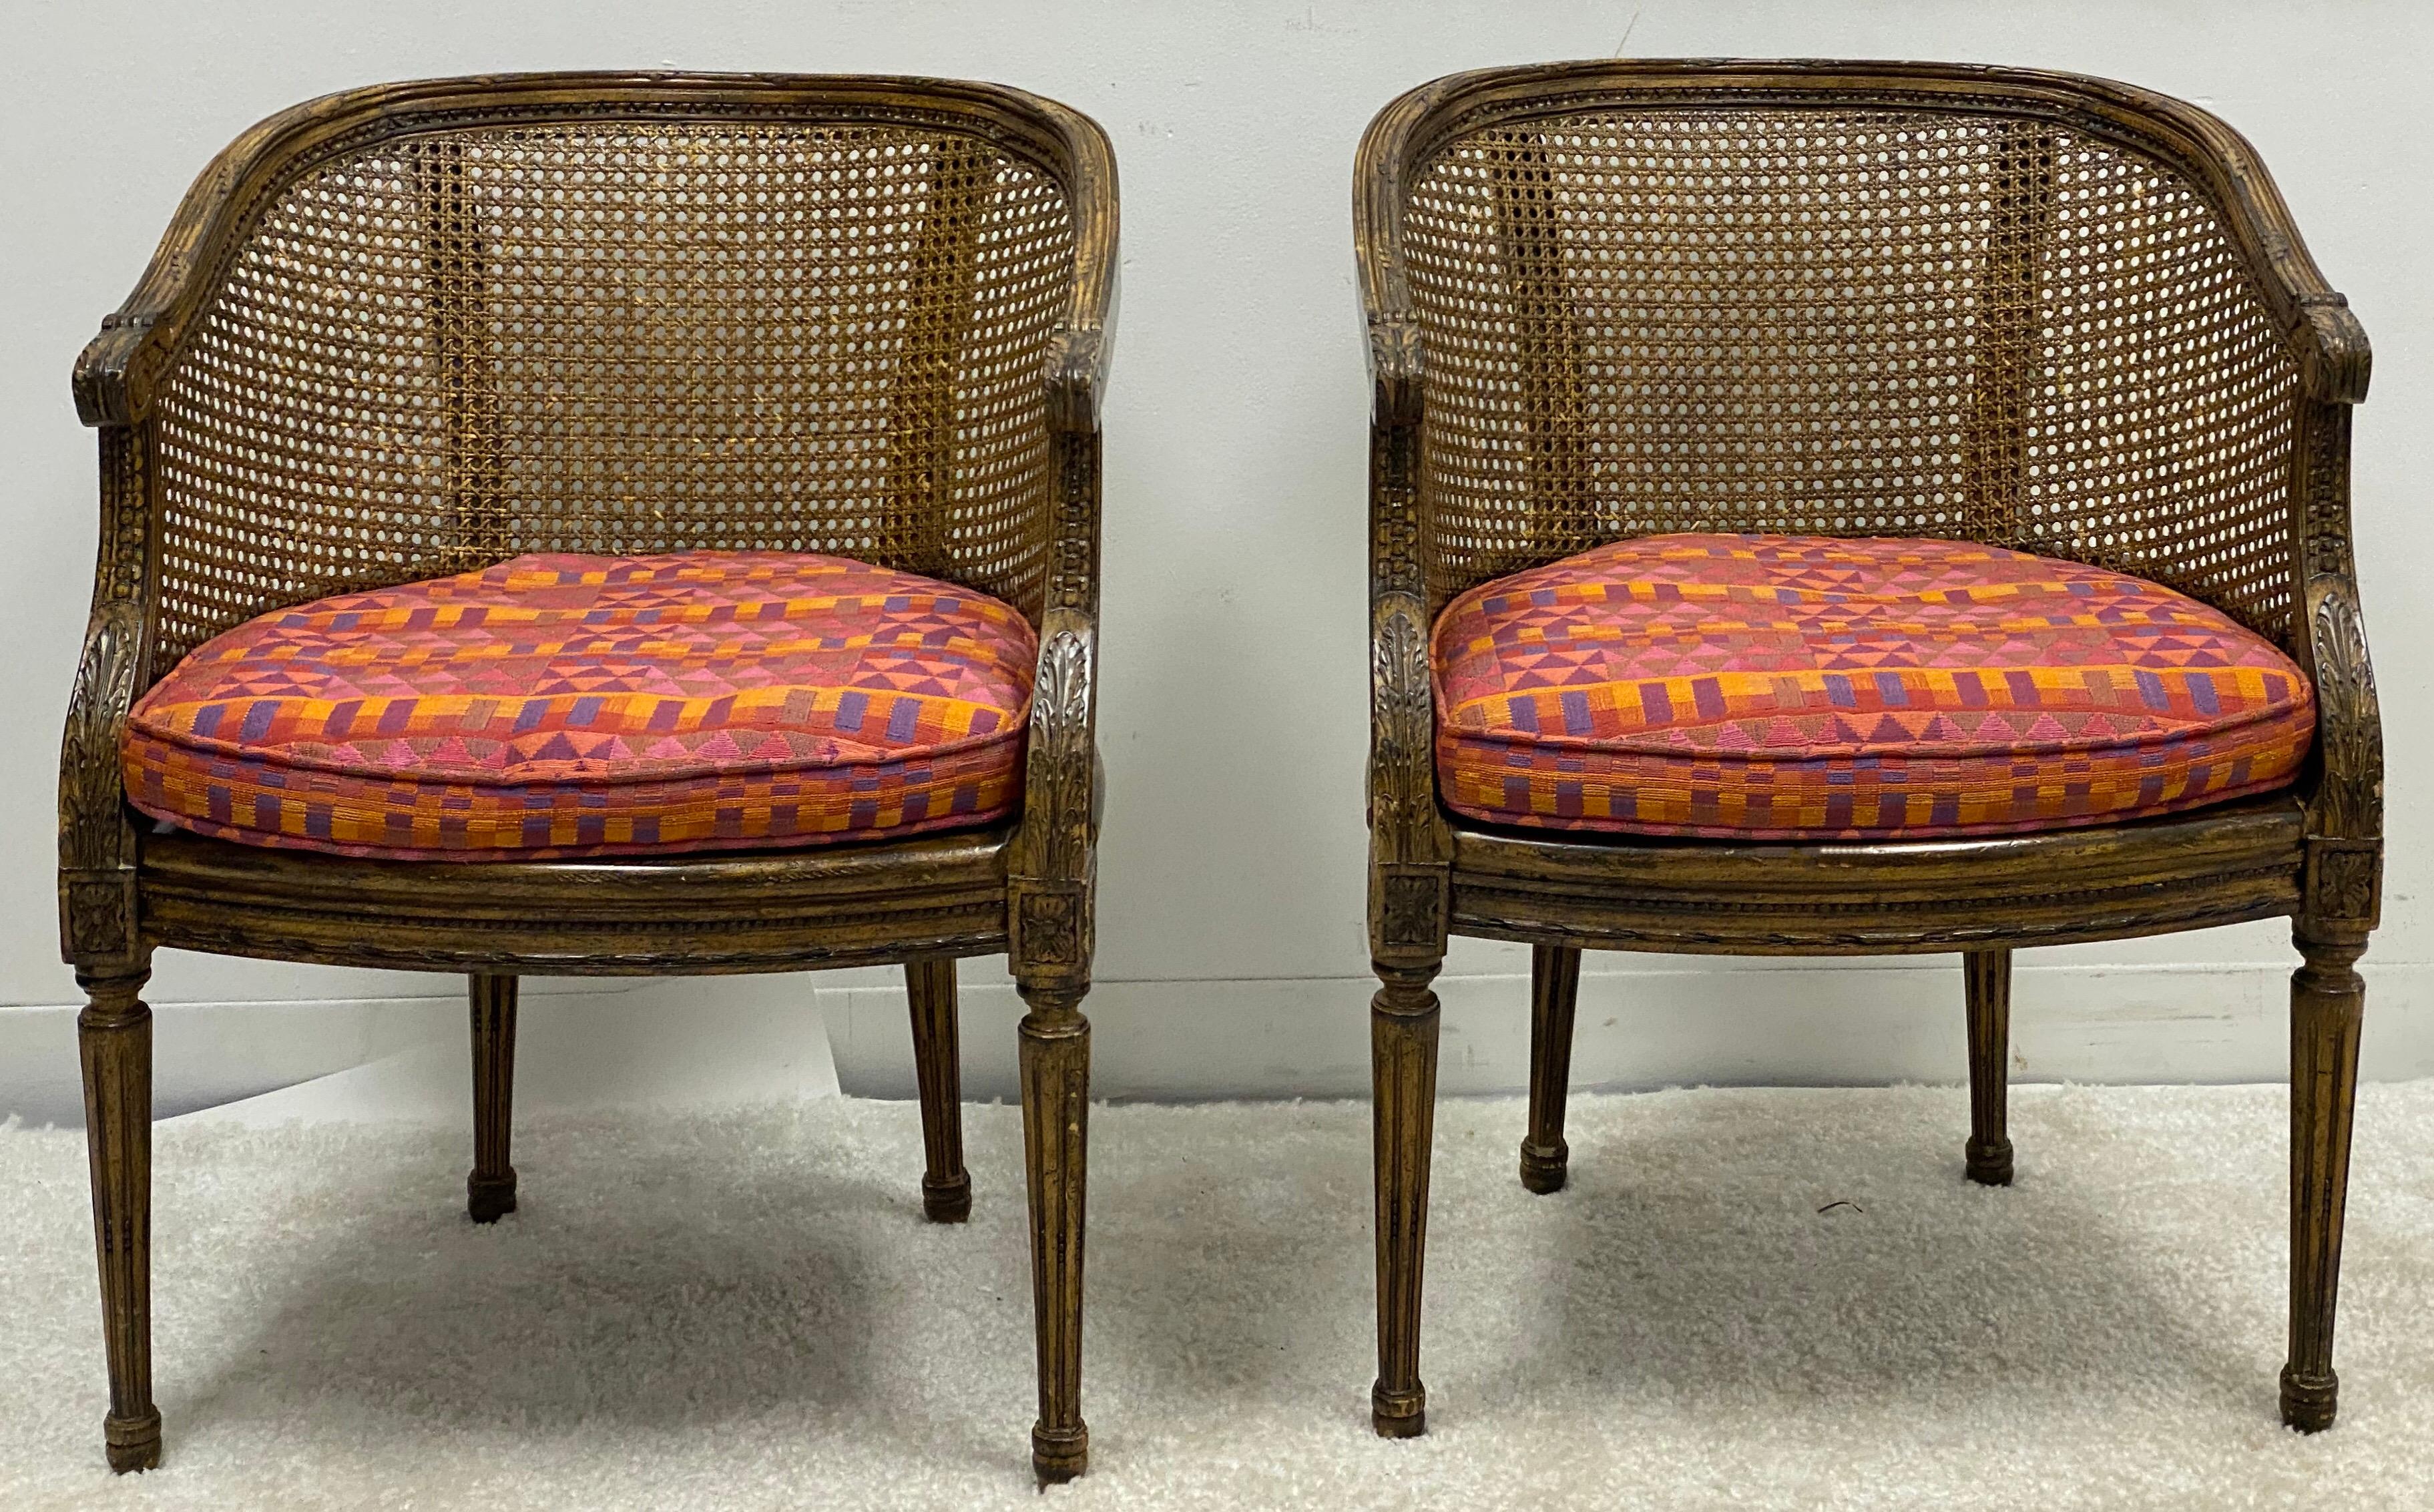 This is a lovely pair of French Louis XVI style caned barrel chairs attributed to Lewis Mittman. The cushion is vintage, and the chairs are unmarked.